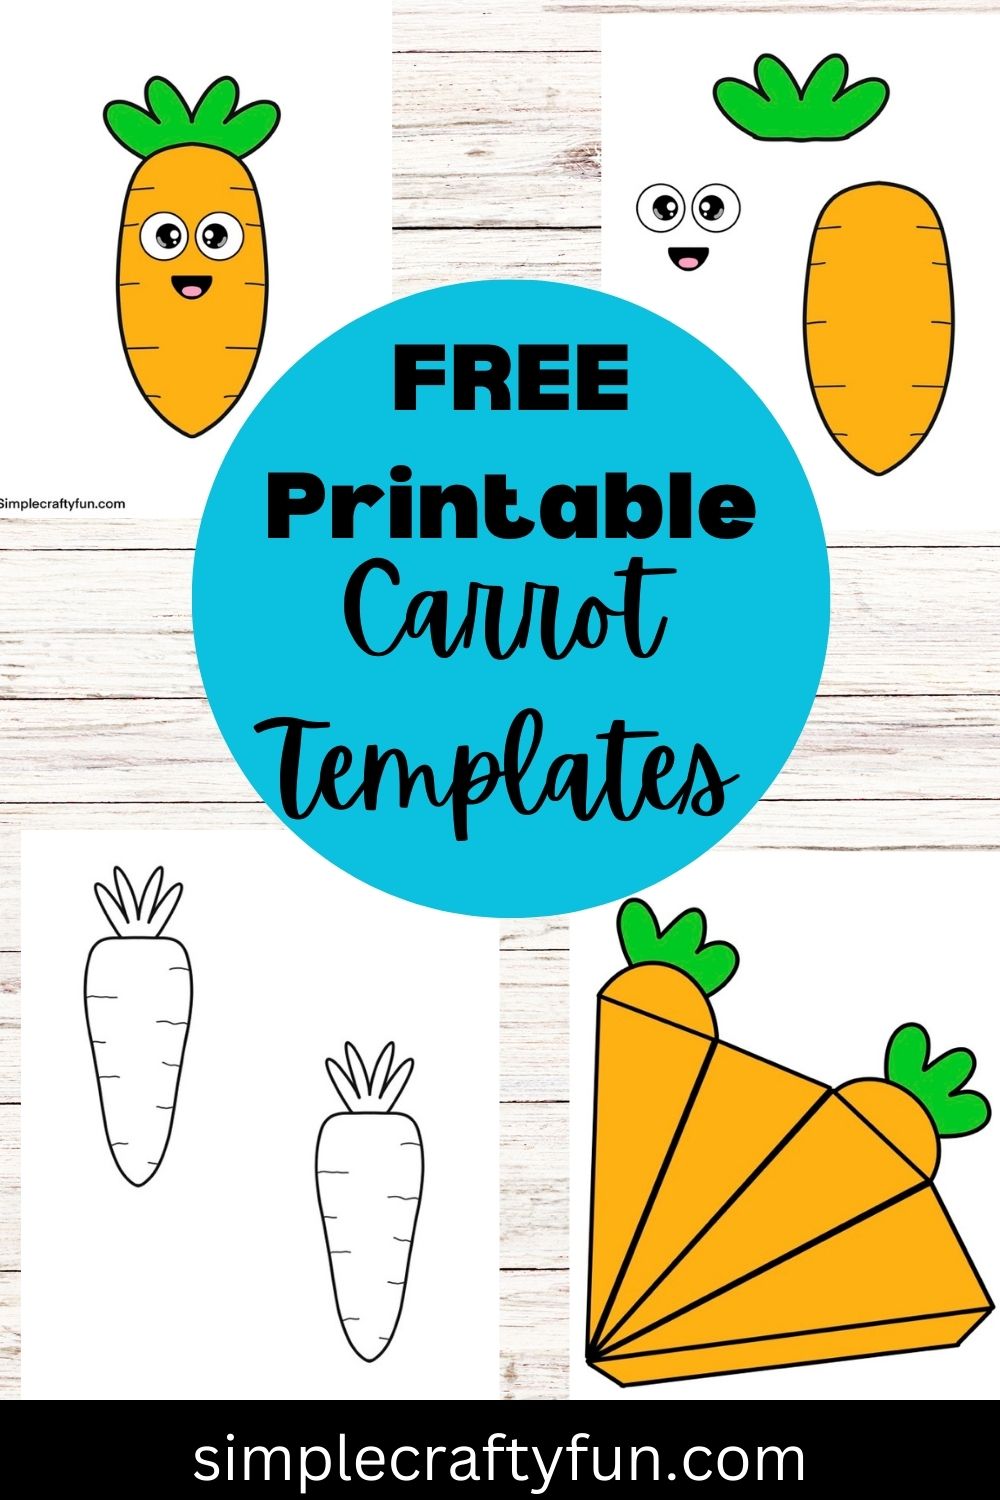 carrot templates for kids crafts for Easter or spring